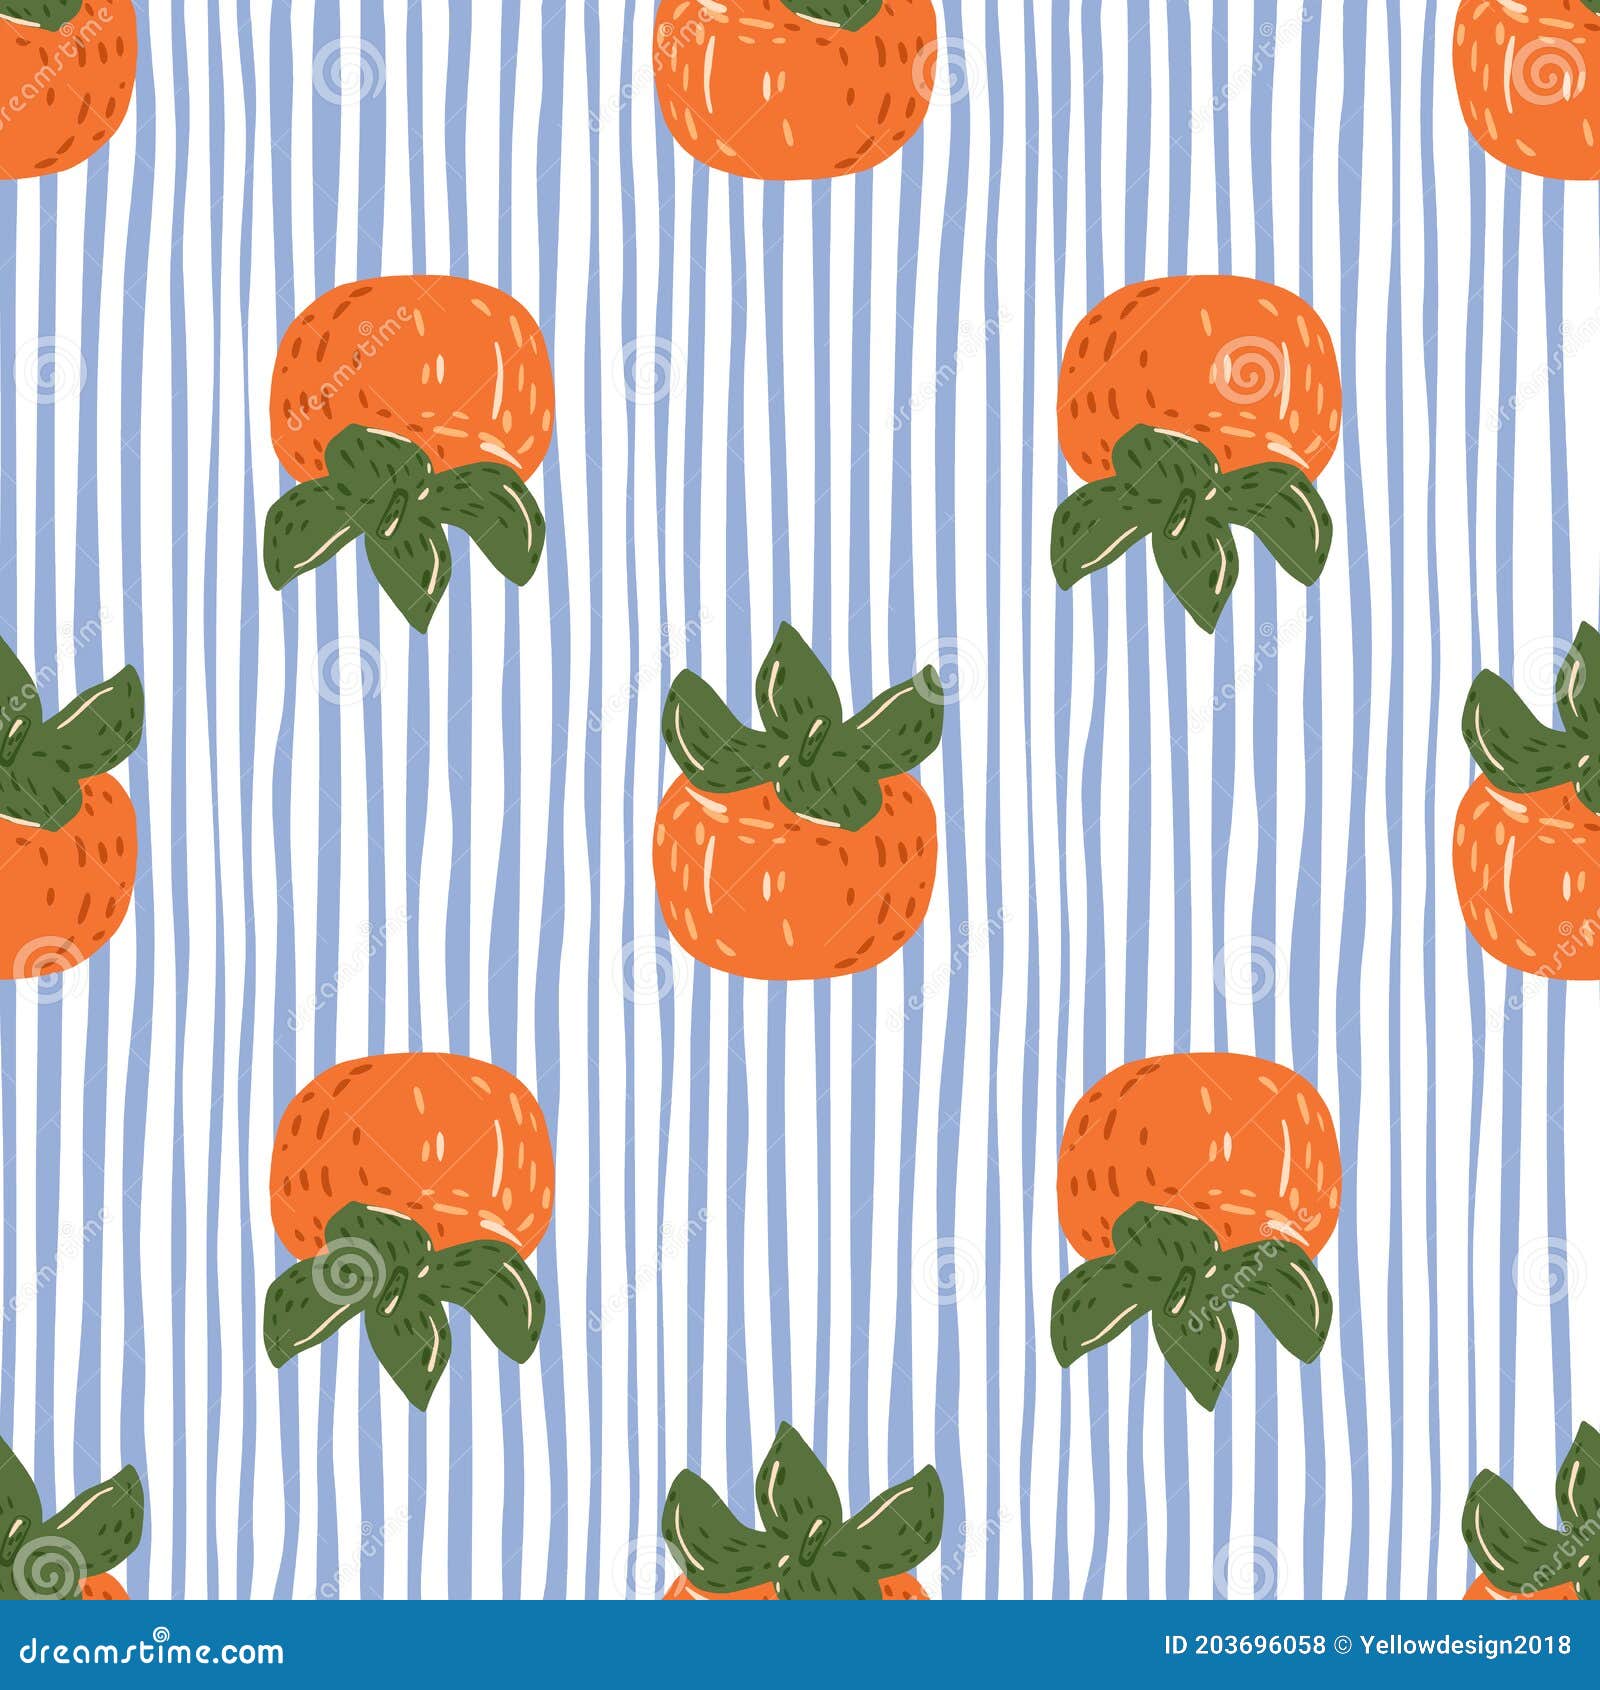 Natural Vitamin Seamless Pattern With Orange Persimmons Ornament Fruit